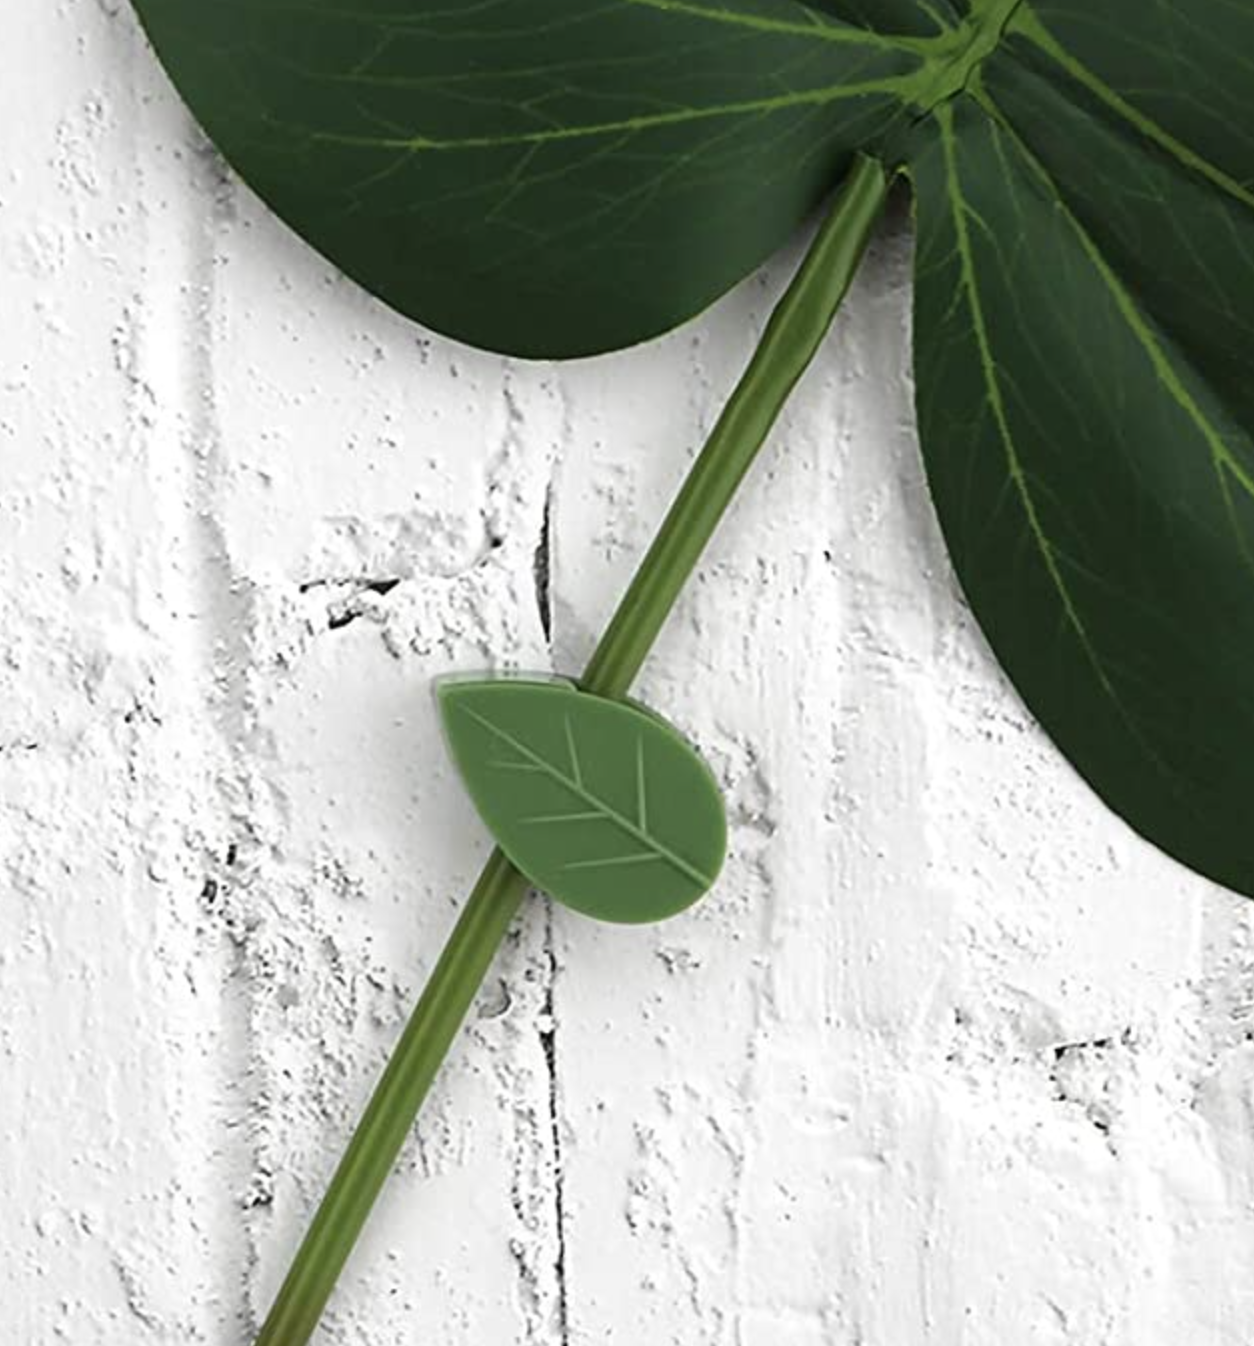 The plant clip holding the stem of a leaf to a wall